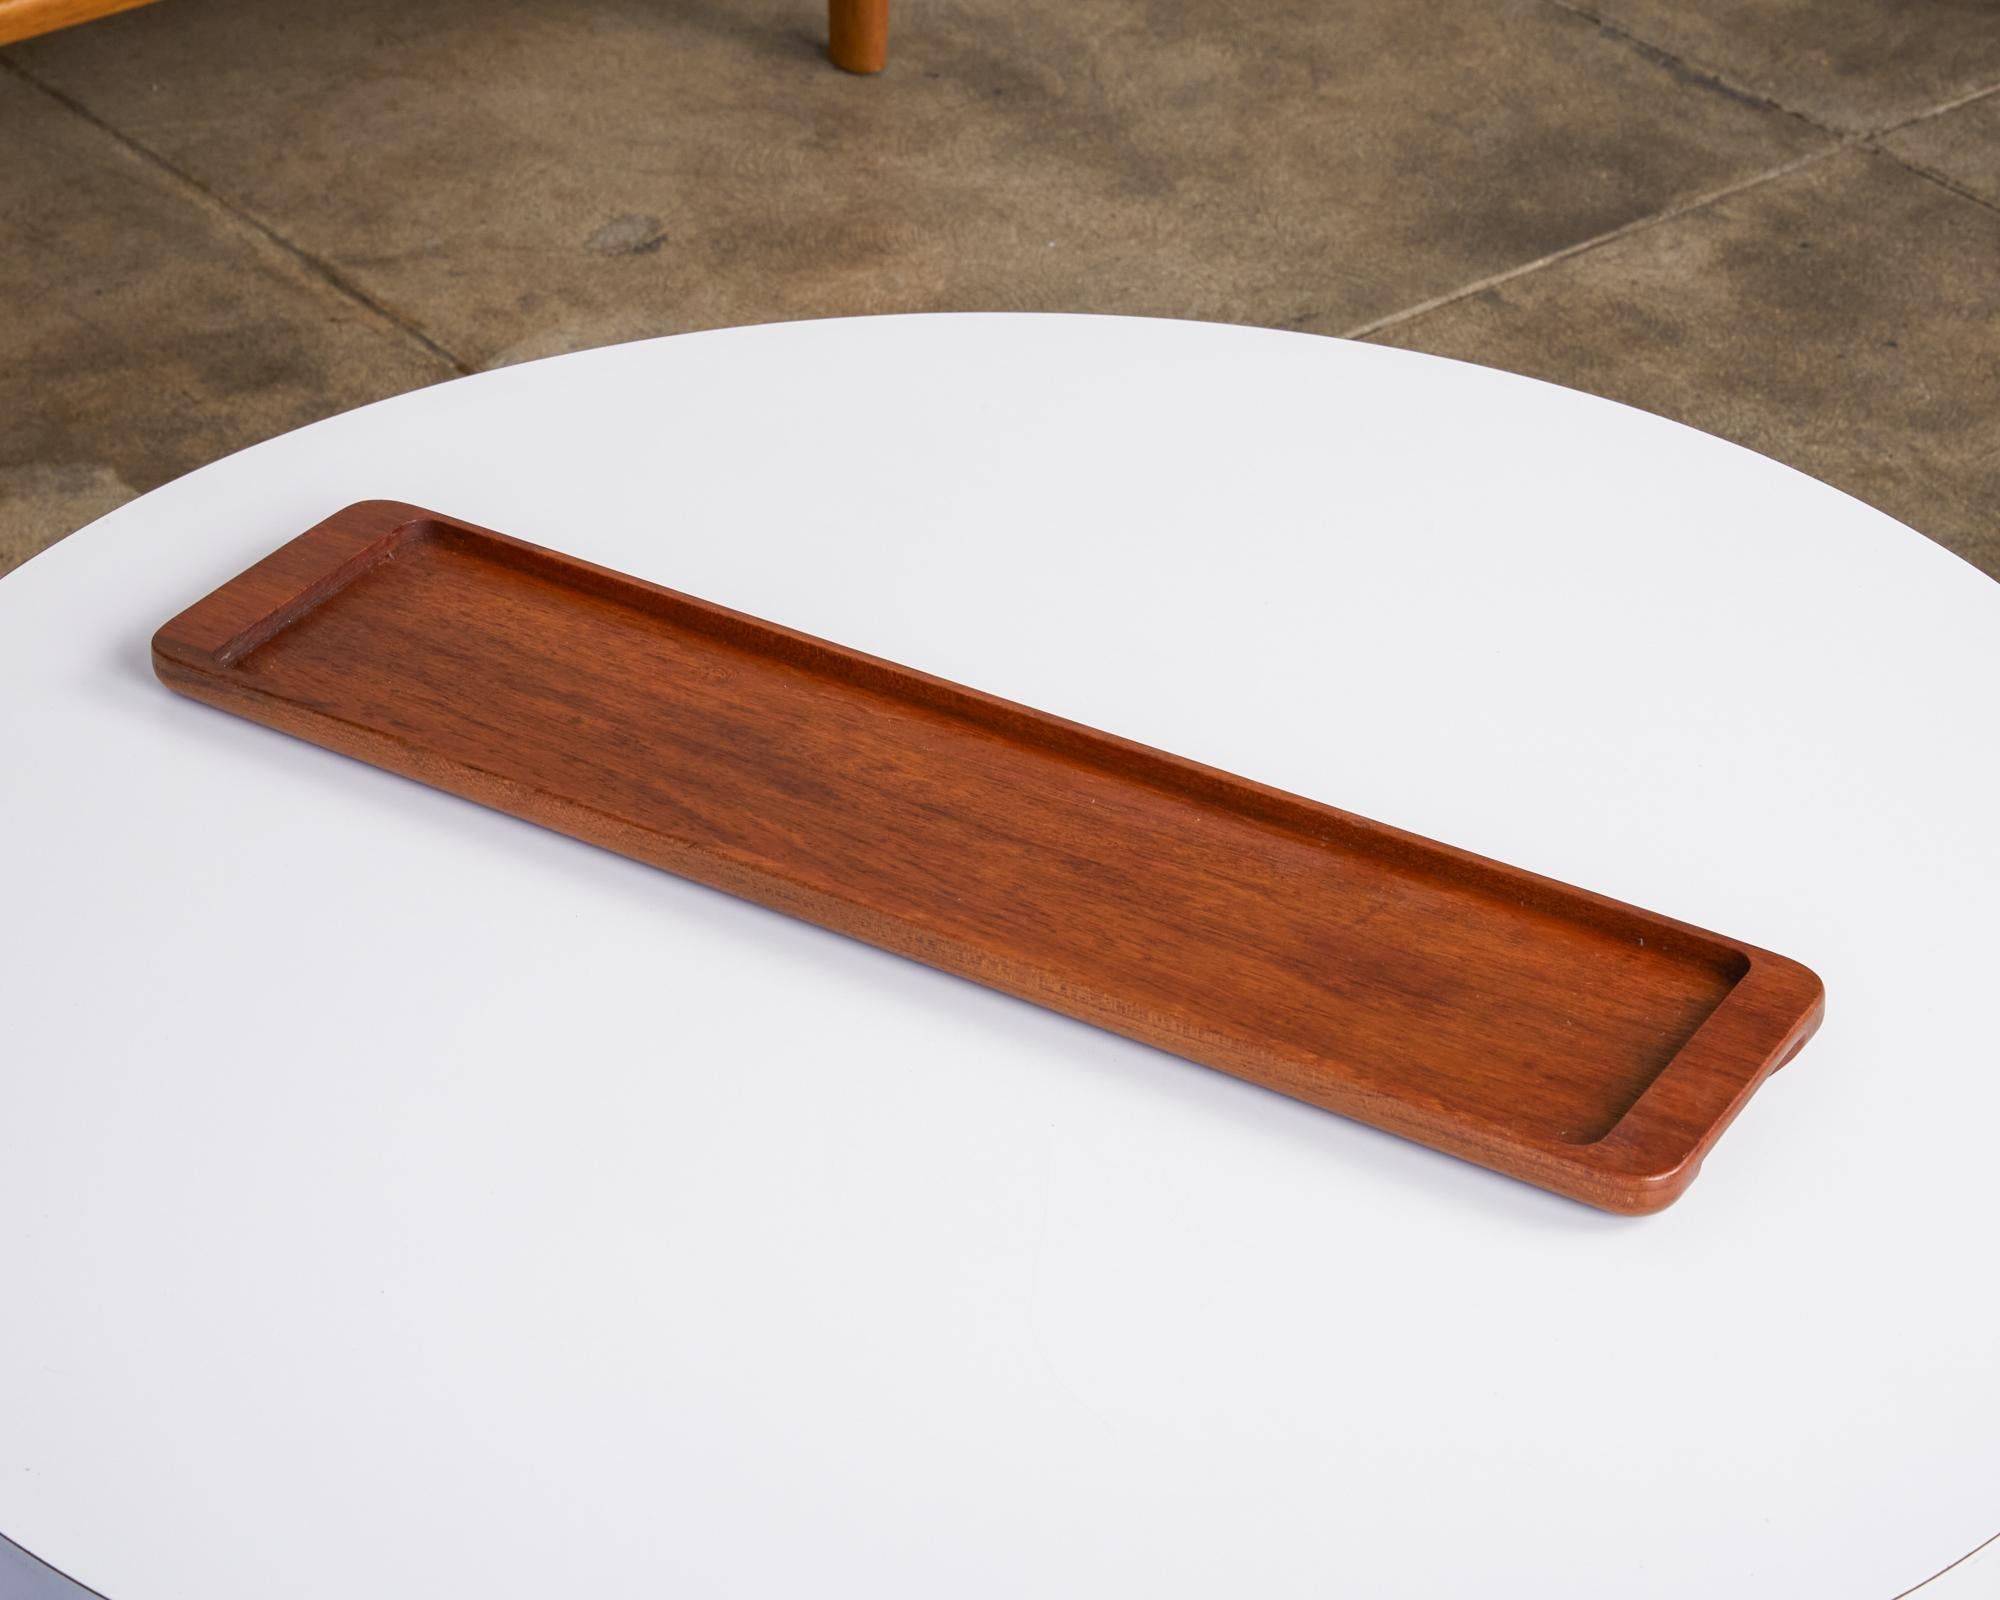 Rectangular teak serving tray by ESA Denmark, circa 1960s. The slender tray features raised edges with an inset middle section perfect for serving your favorite cheese and crackers. The narrow ends feature a cut out section underneath that is meant